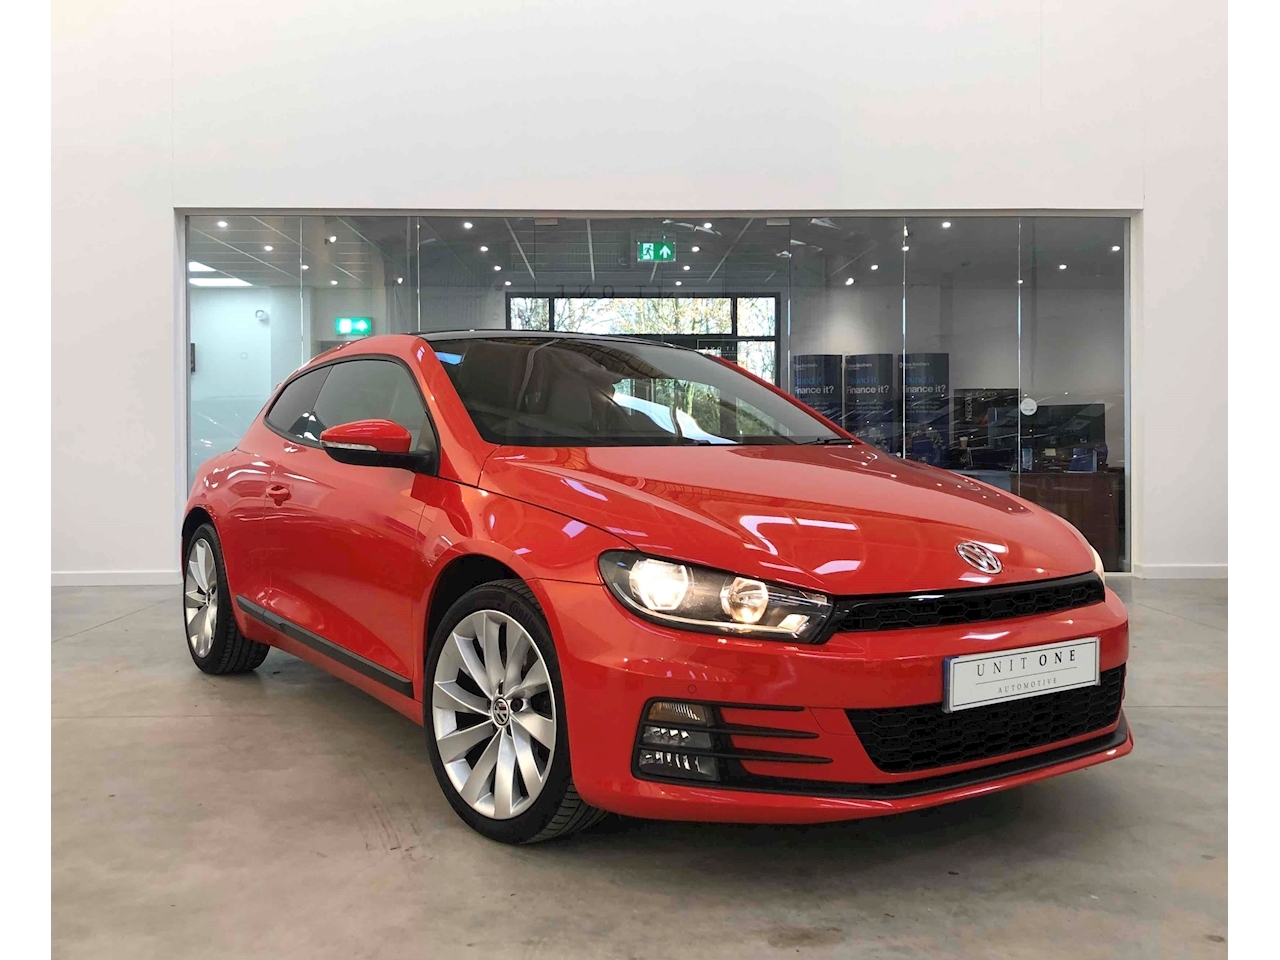 The VW Scirocco is dead (again)